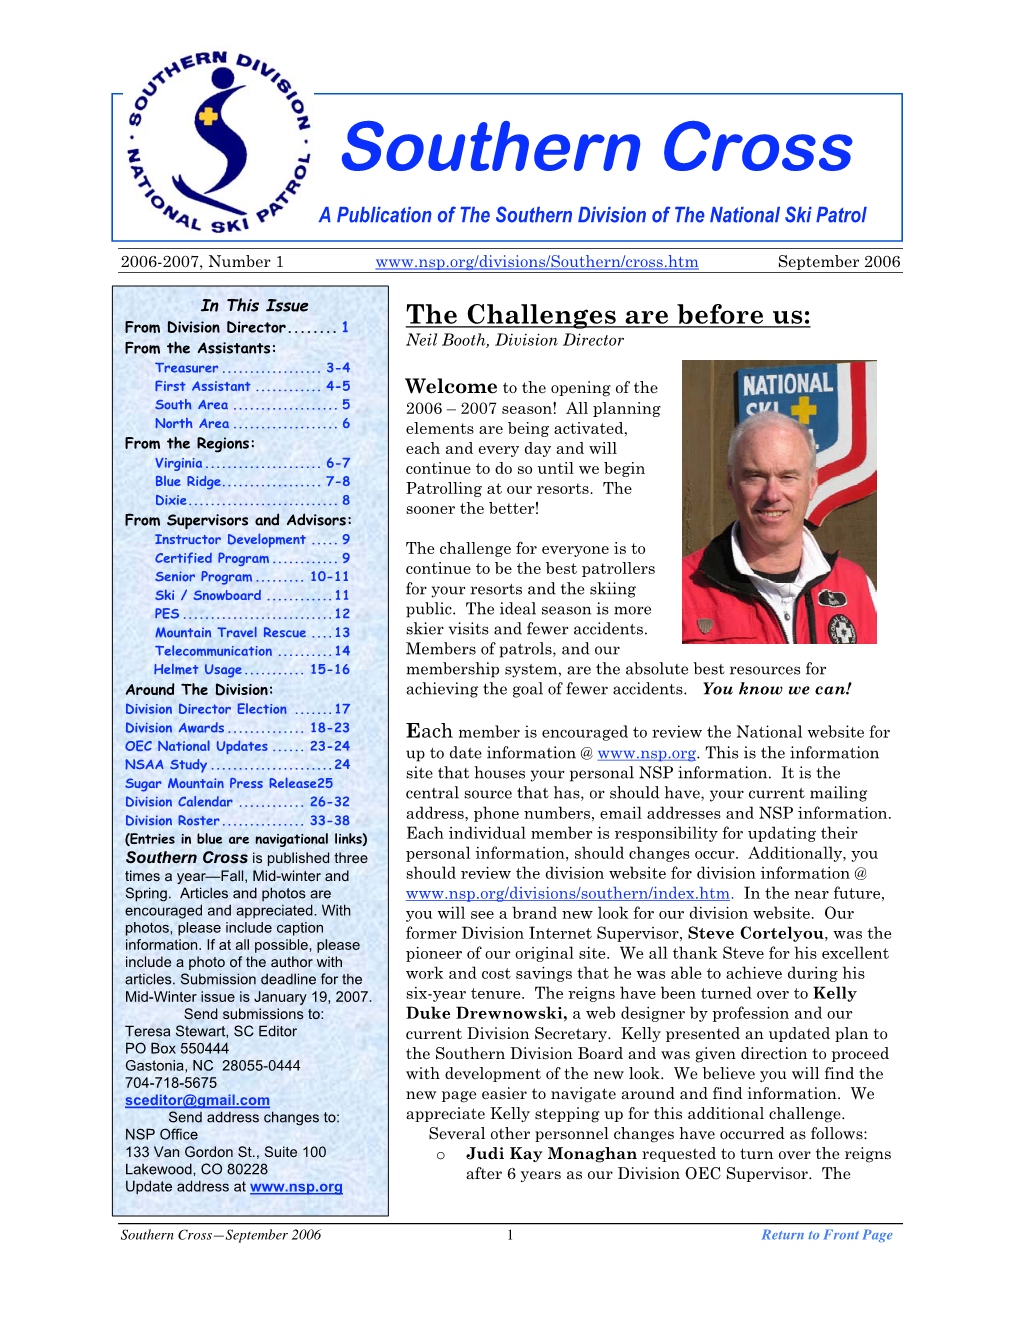 Southern Cross a Publication of the Southern Division of the National Ski Patrol